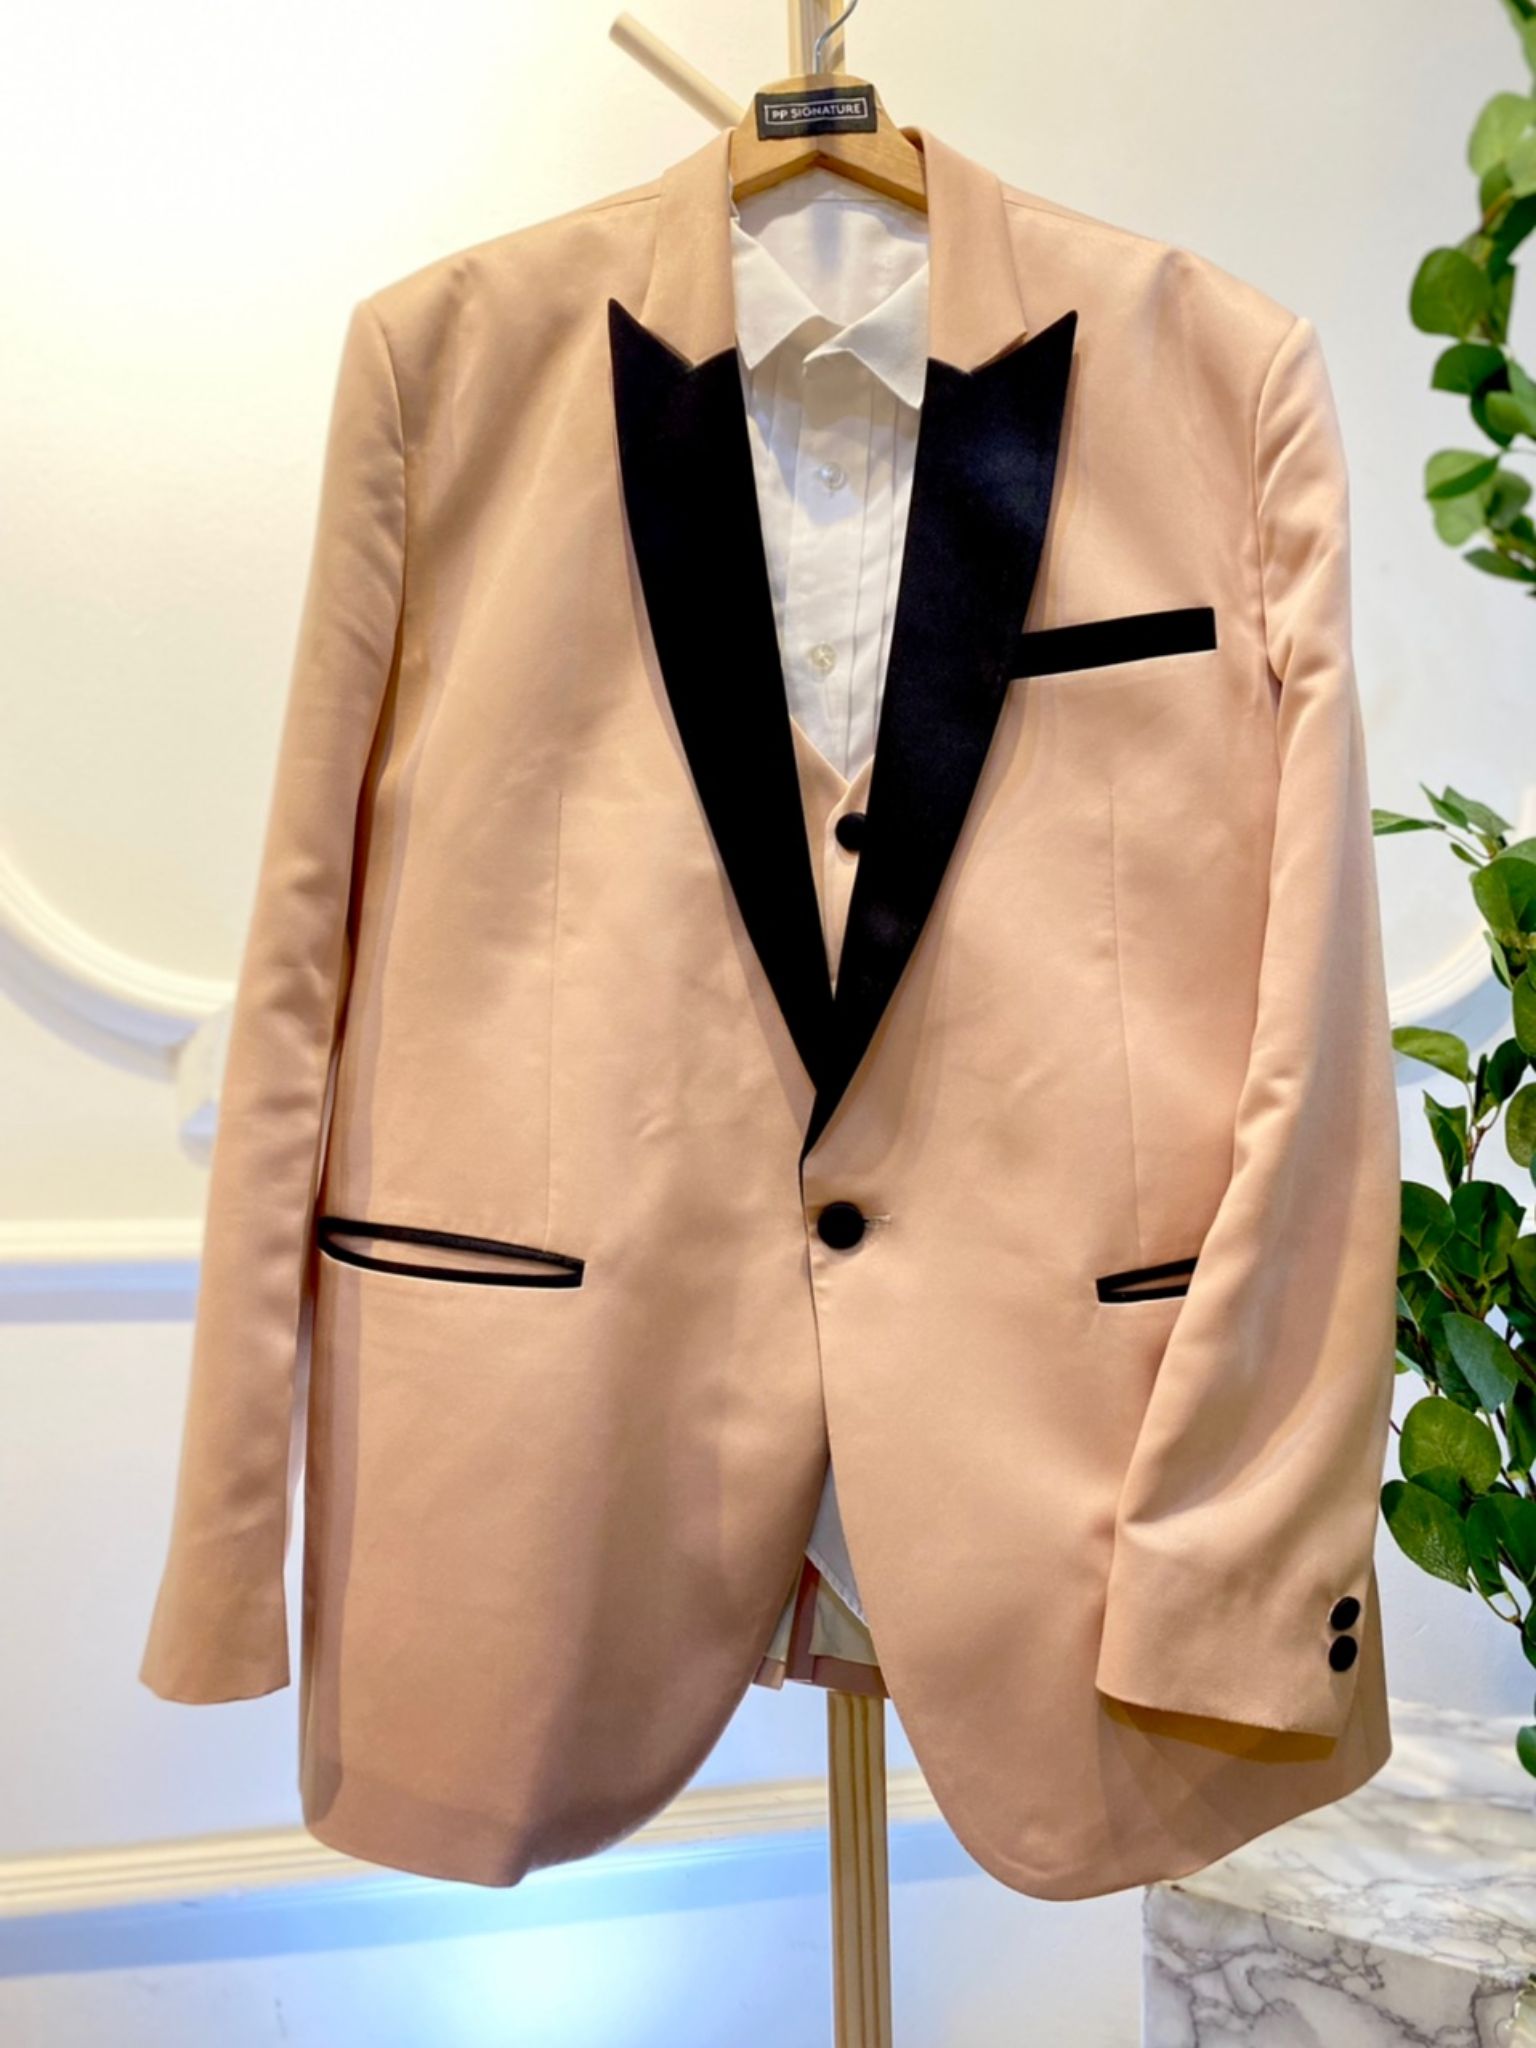 This Champagne 3 Piece Wedding Suit Light Brown with Black Peak lapel tuxedo jacket is the perfect choice for any formal occasion. Made from high-quality duchess fabric, it is both stylish and comfortable. The jacket features a classic single-breasted design with a peak lapel and satin trim. It also has two side pockets and one breast pocket. This jacket is available in a variety of sizes to fit all body types.